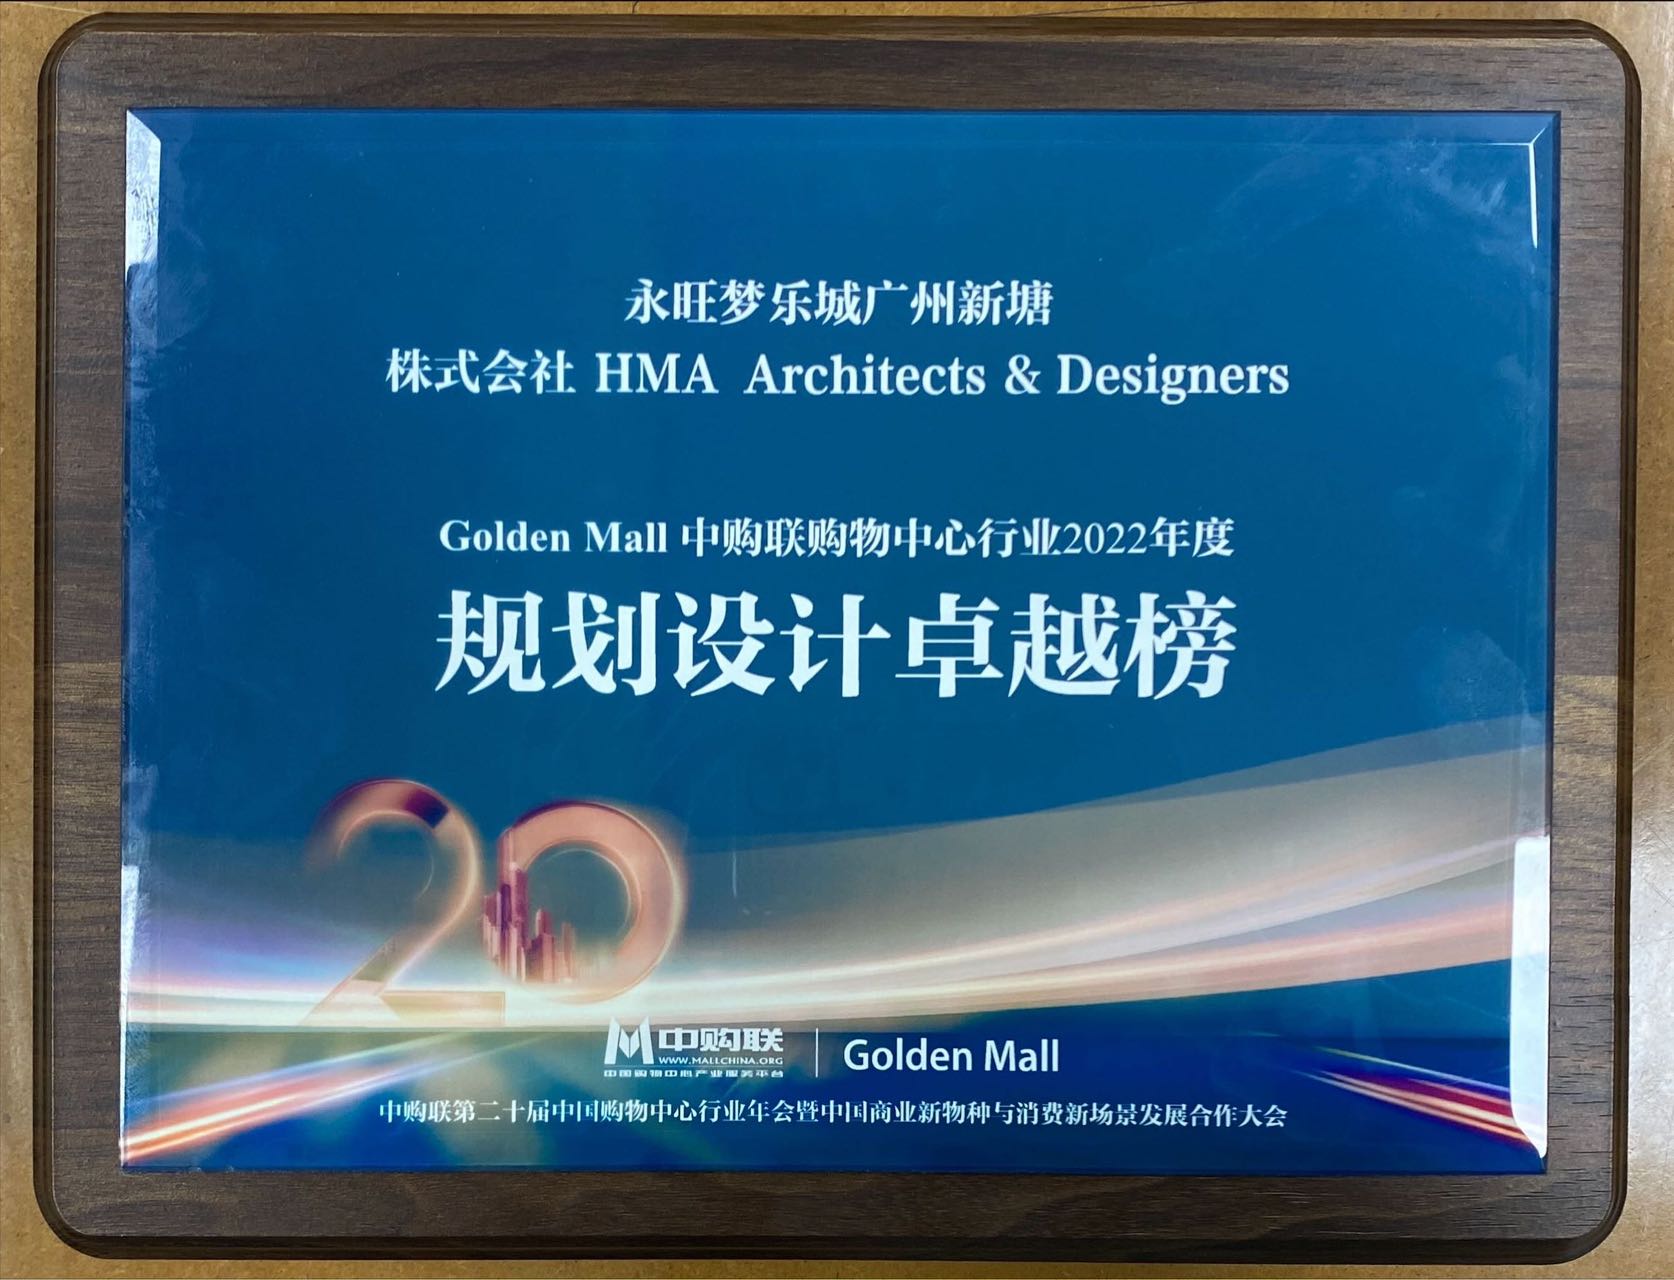 Mall China's FY 2022 List of Excellent Design